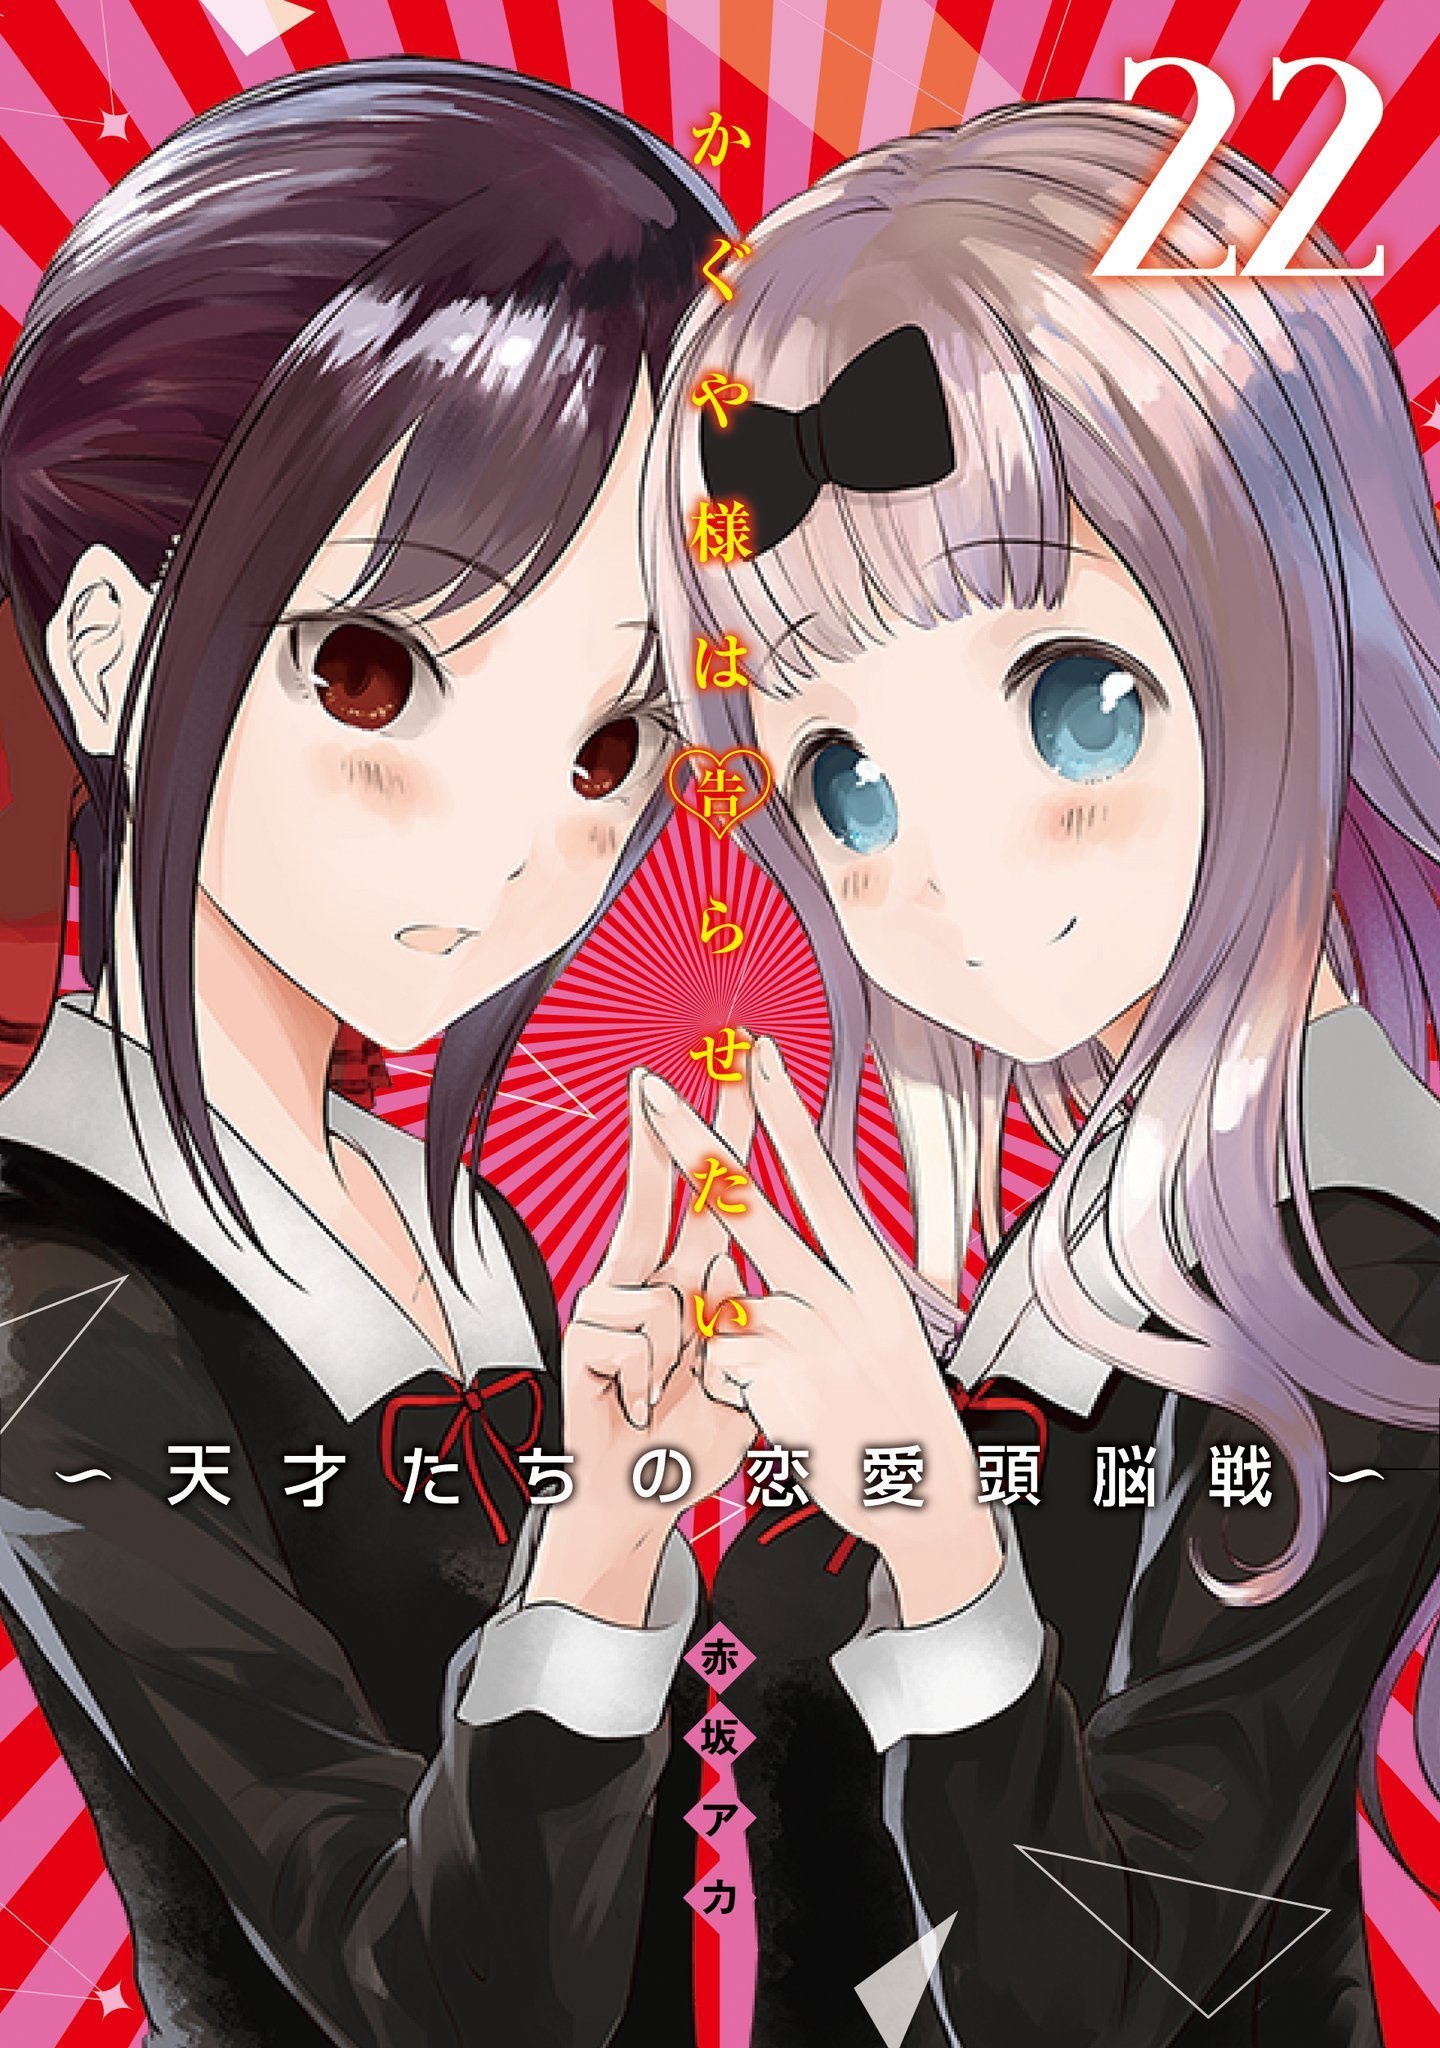 Manga Mogura RE on X: Kaguya-sama: Love is War by Aka Akasaka will start  its final arc in the upcoming Weekly Young Jump issue 47/2021 out Oct 21,  2021  / X